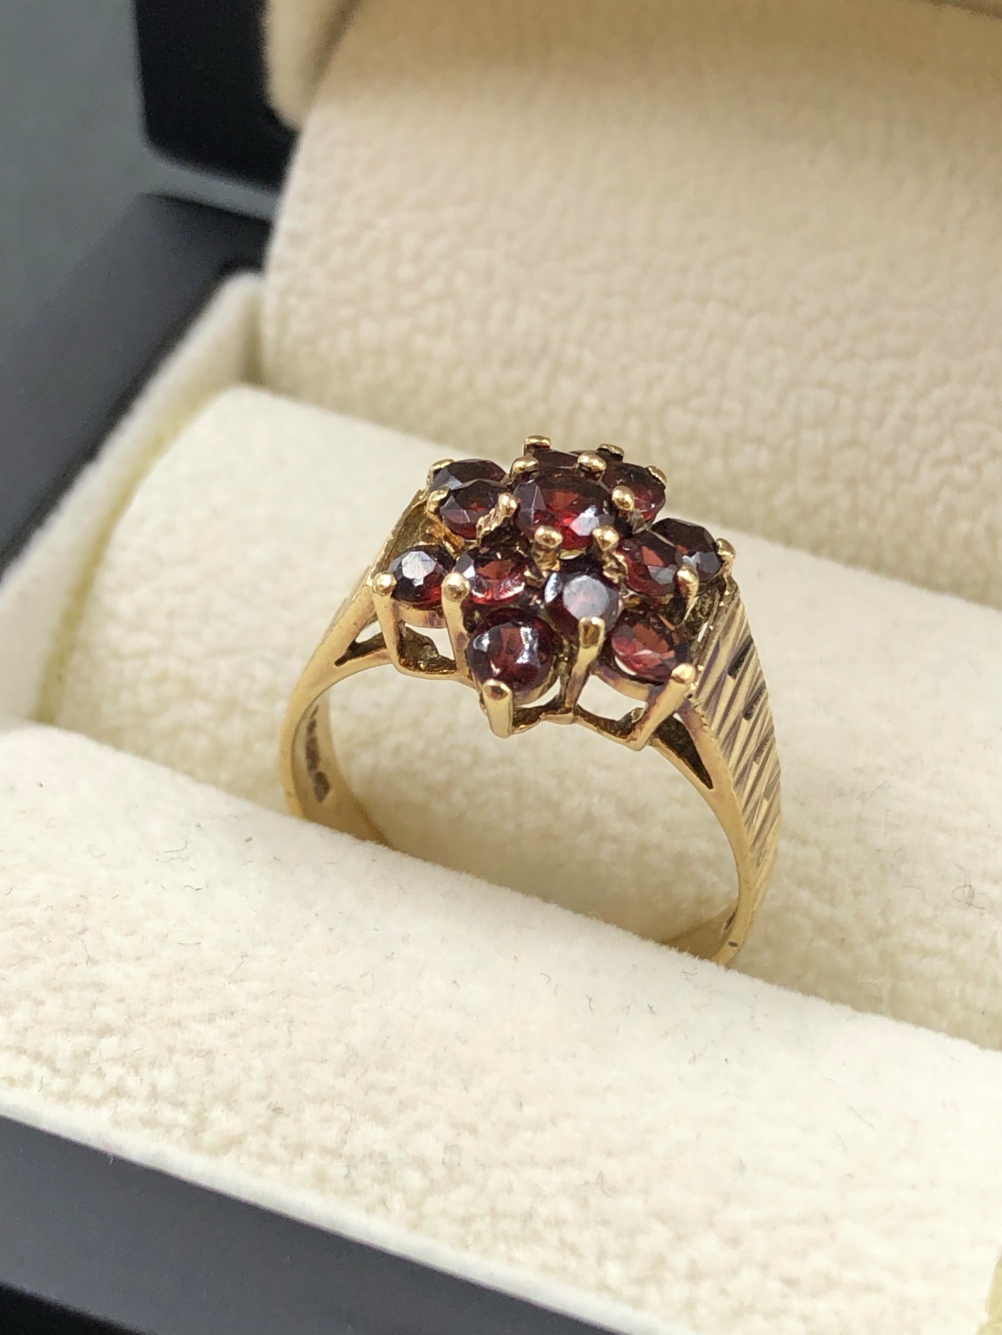 A 9ct HALLMARKED GOLD GARNET CLUSTER RING. FINGER SIZE P 1/2. WEIGHT 3.71grms - Image 2 of 2